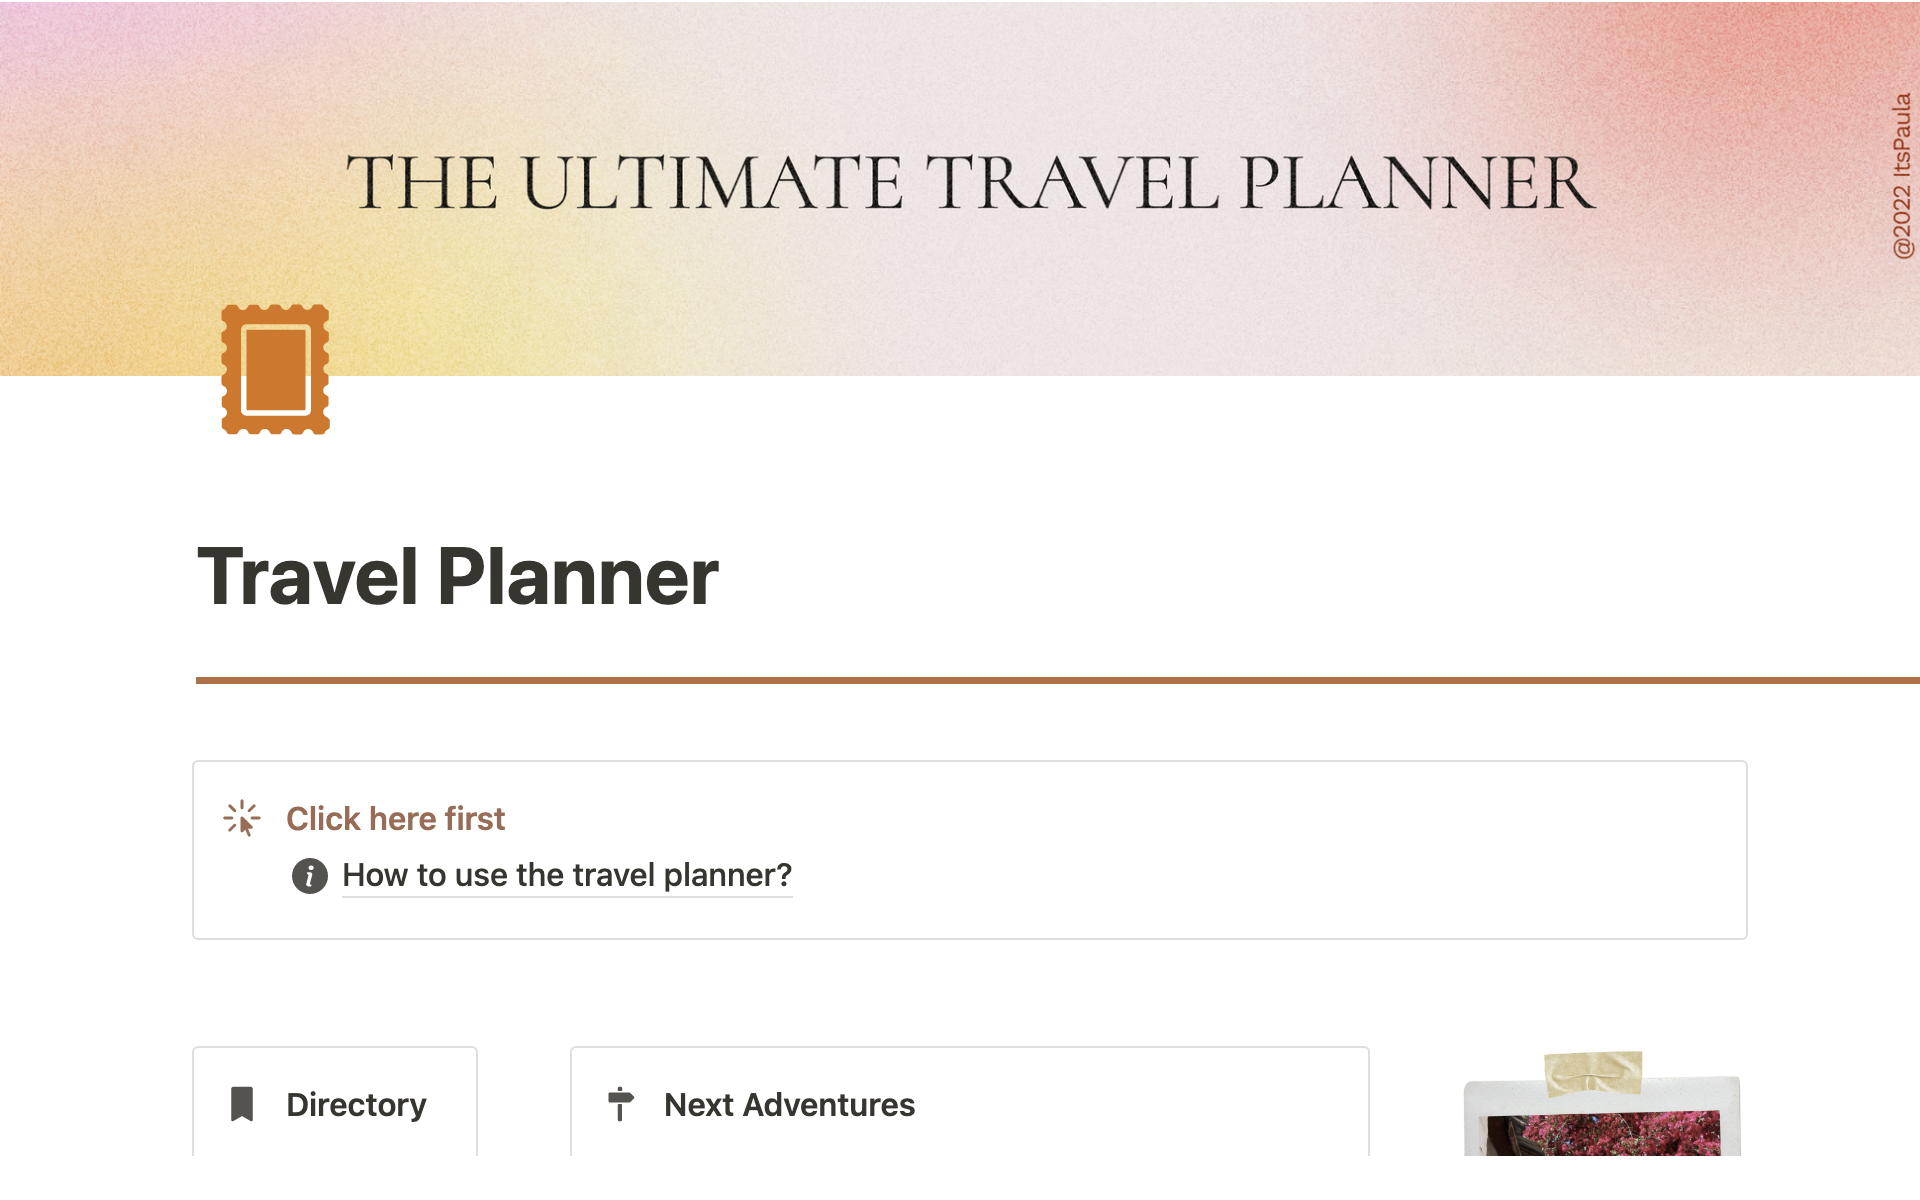 Easily plan, track and remember your adventures and business trips.